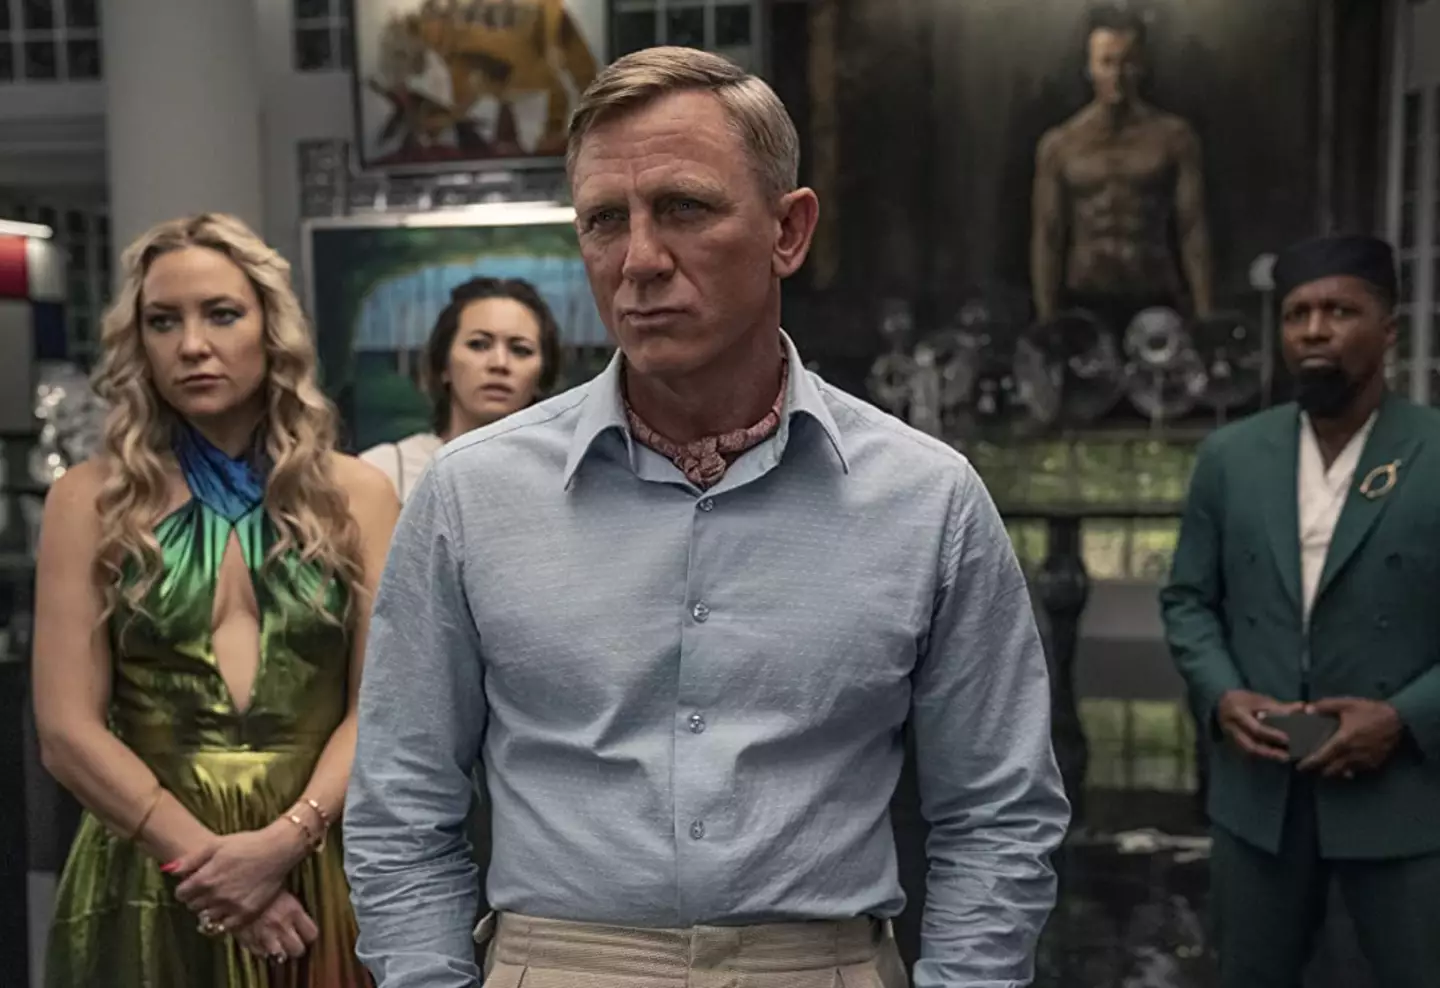 Daniel Craig plans on giving his wealth away.